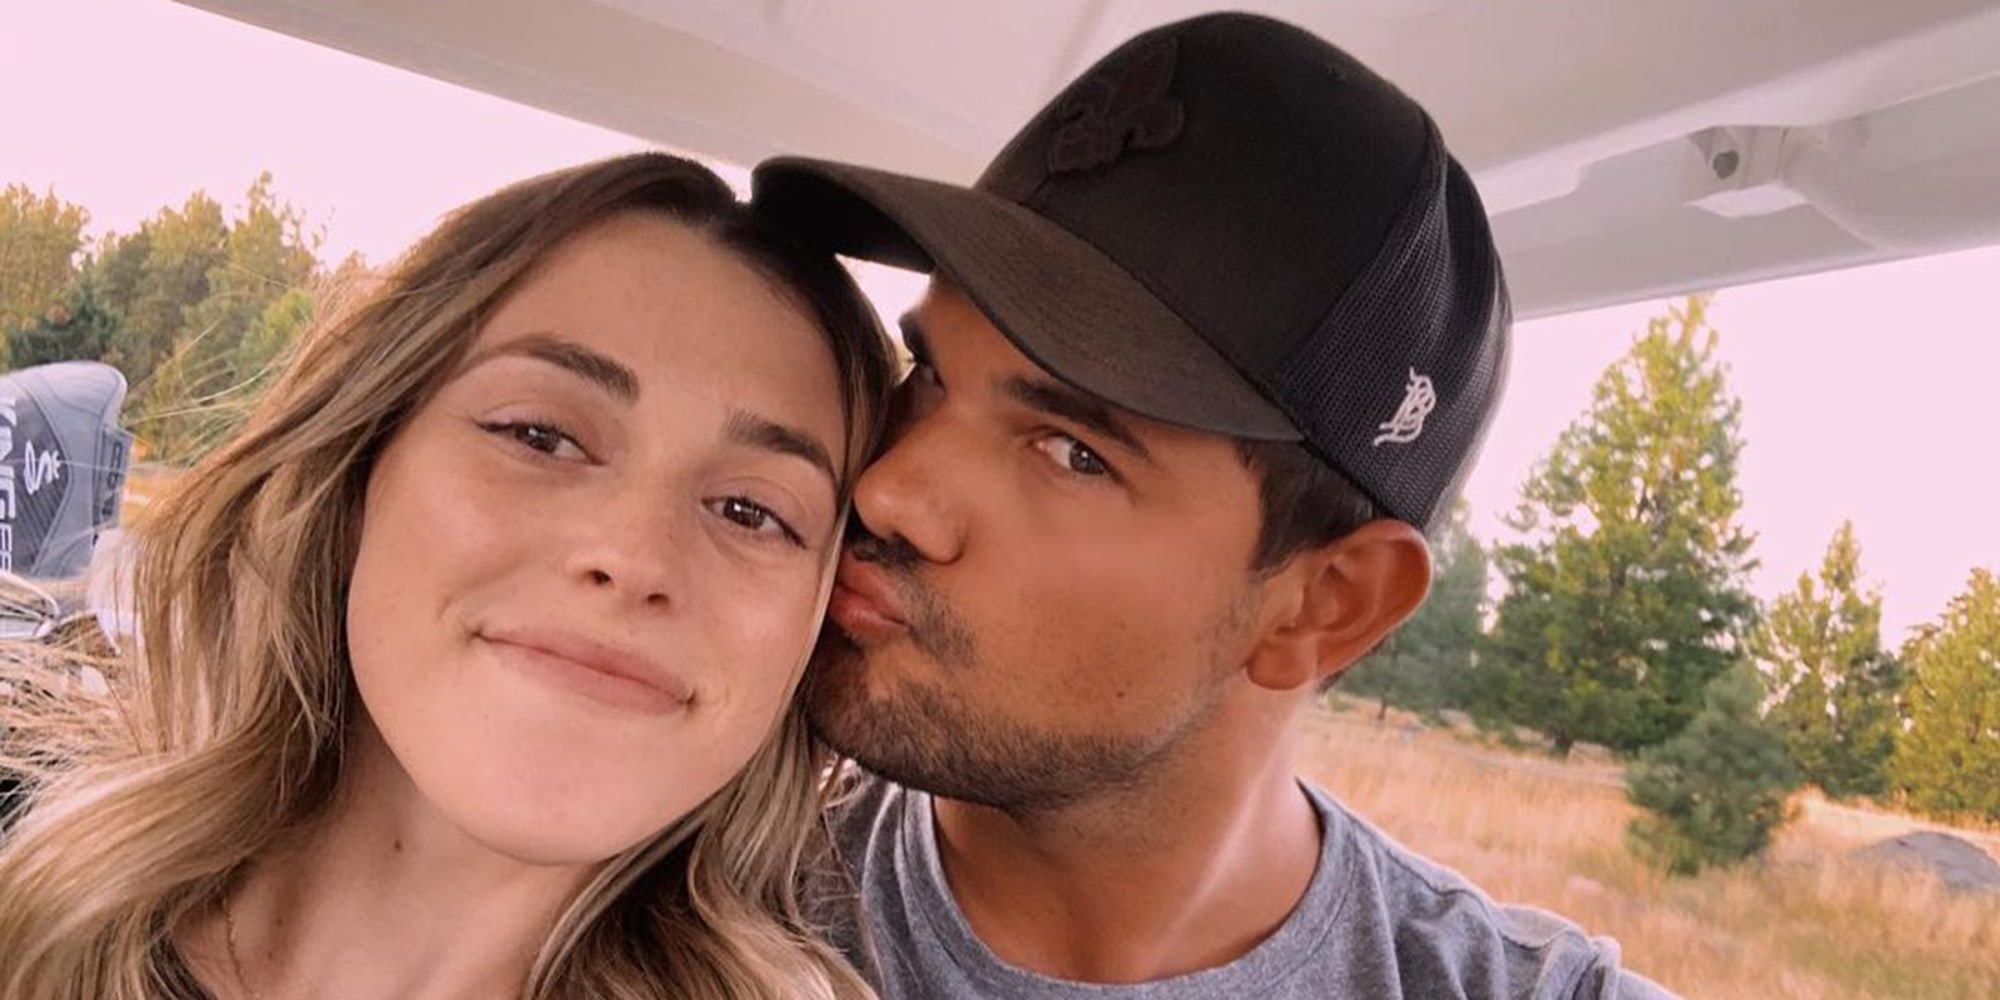 Taylor Lautner and his fiance Tay Dome. Photo: Instagram.